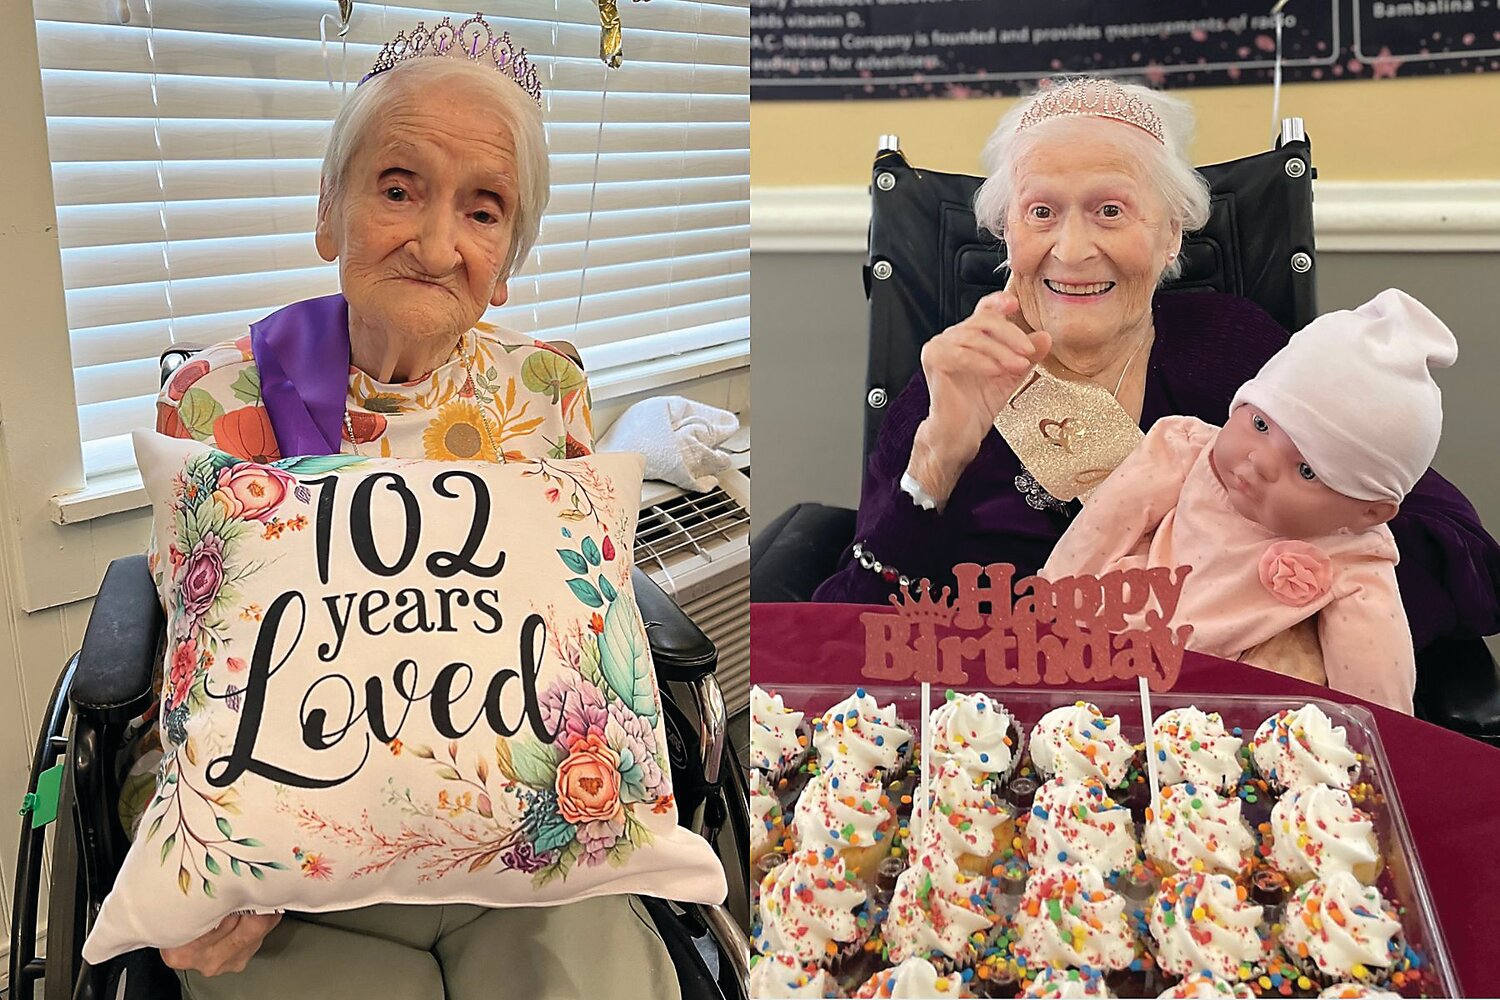 Oxford Rehabilitation & Healthcare Center in Langhorne recently celebrated the birthdays of Laura “Babe” Sidman and Dorothy Yelenchic, who turned 102 and 101, respectively.